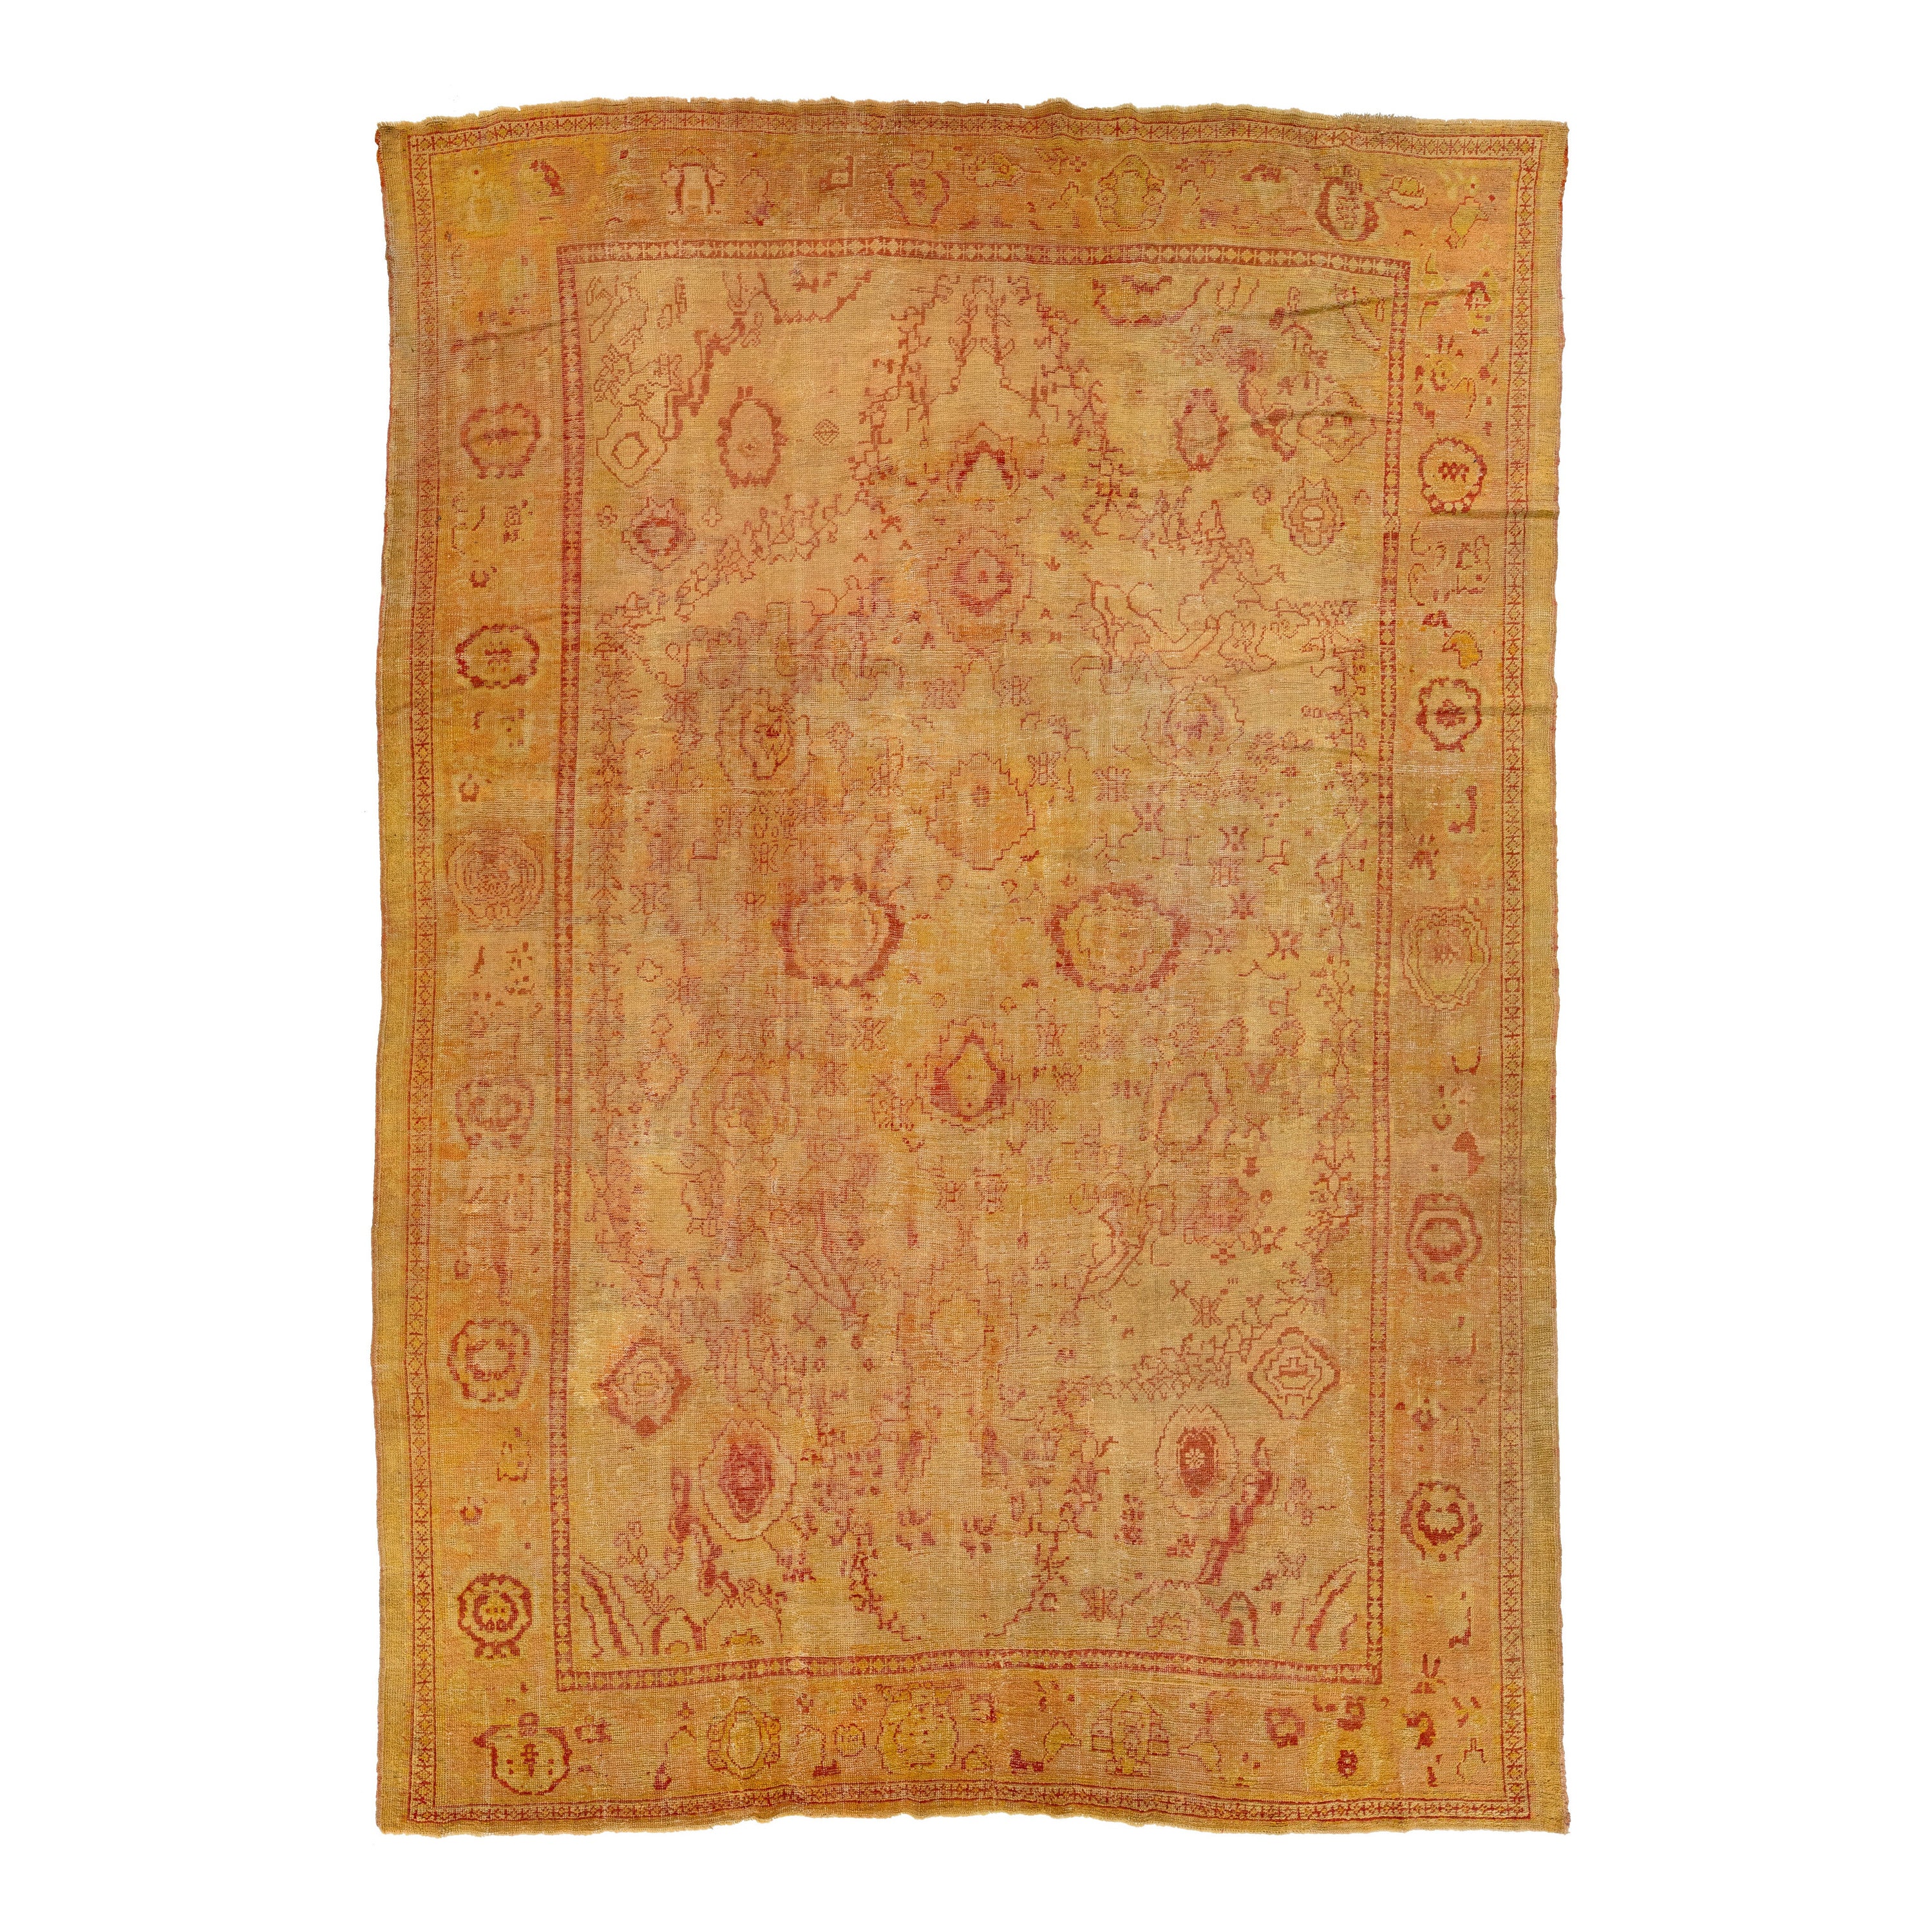 19th. C. Turkish Oushak Wool Rug In Tan with Allover Floral Design For Sale